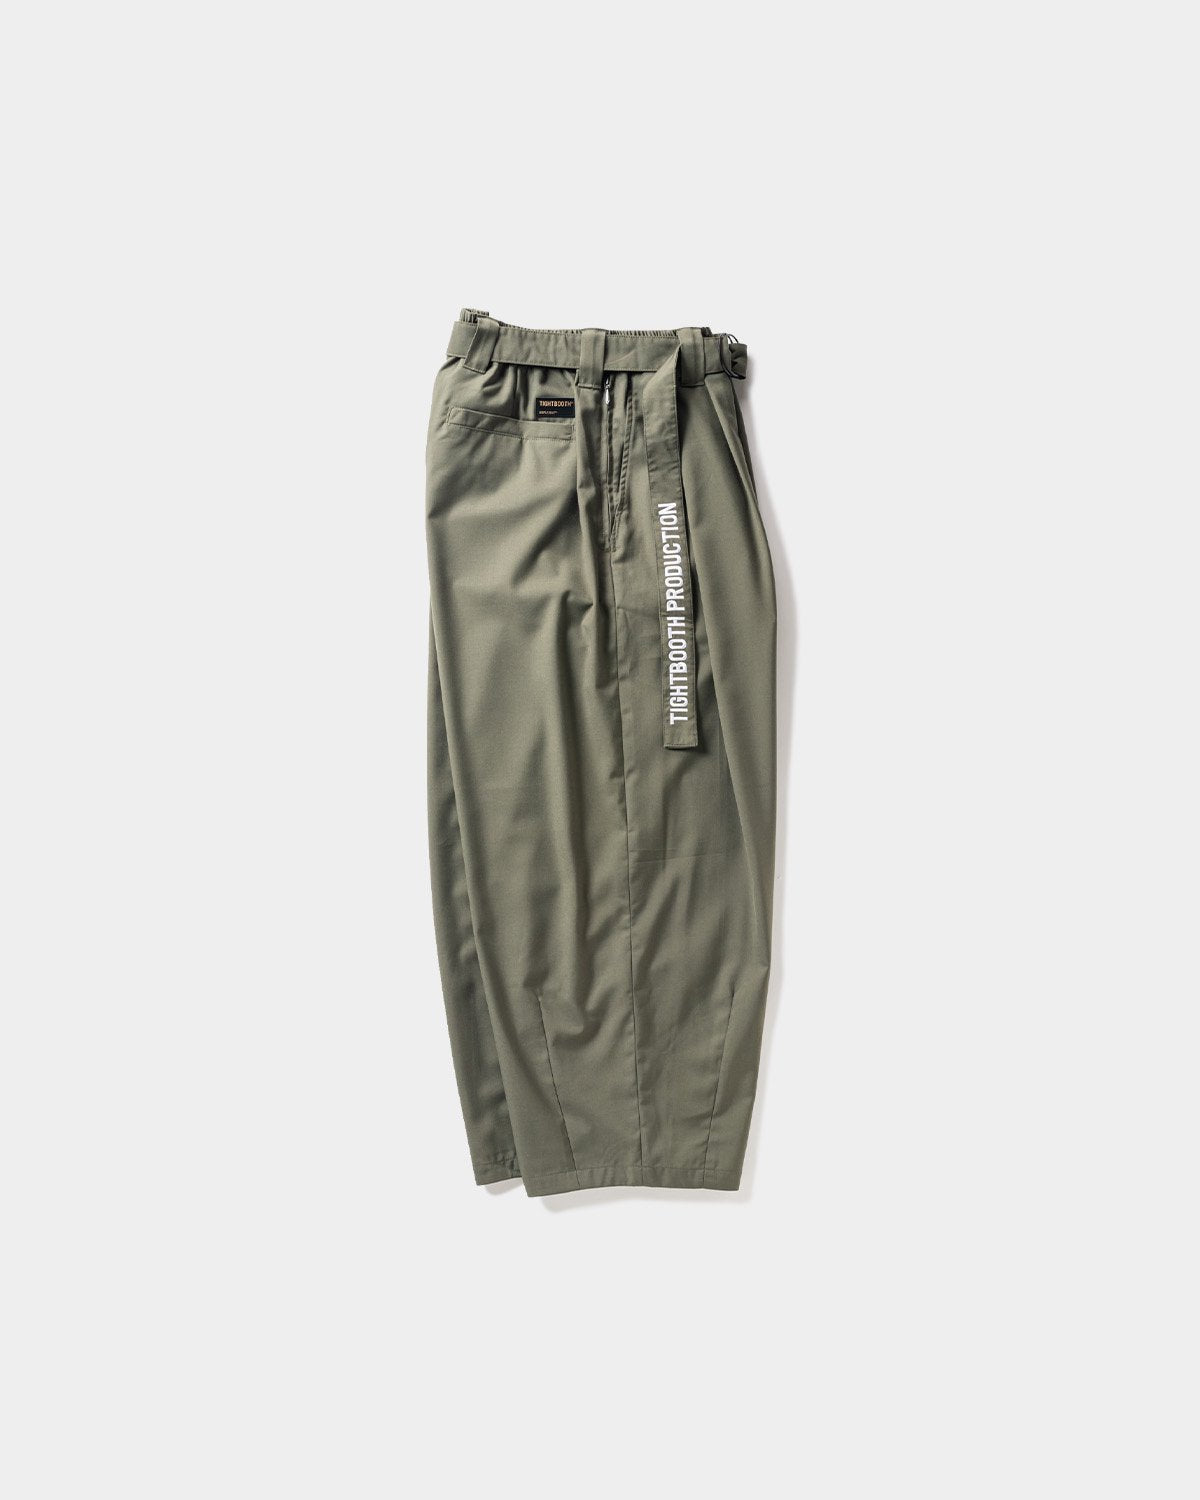 TIGHTBOOTH BAGGY SLACKS – unexpected store